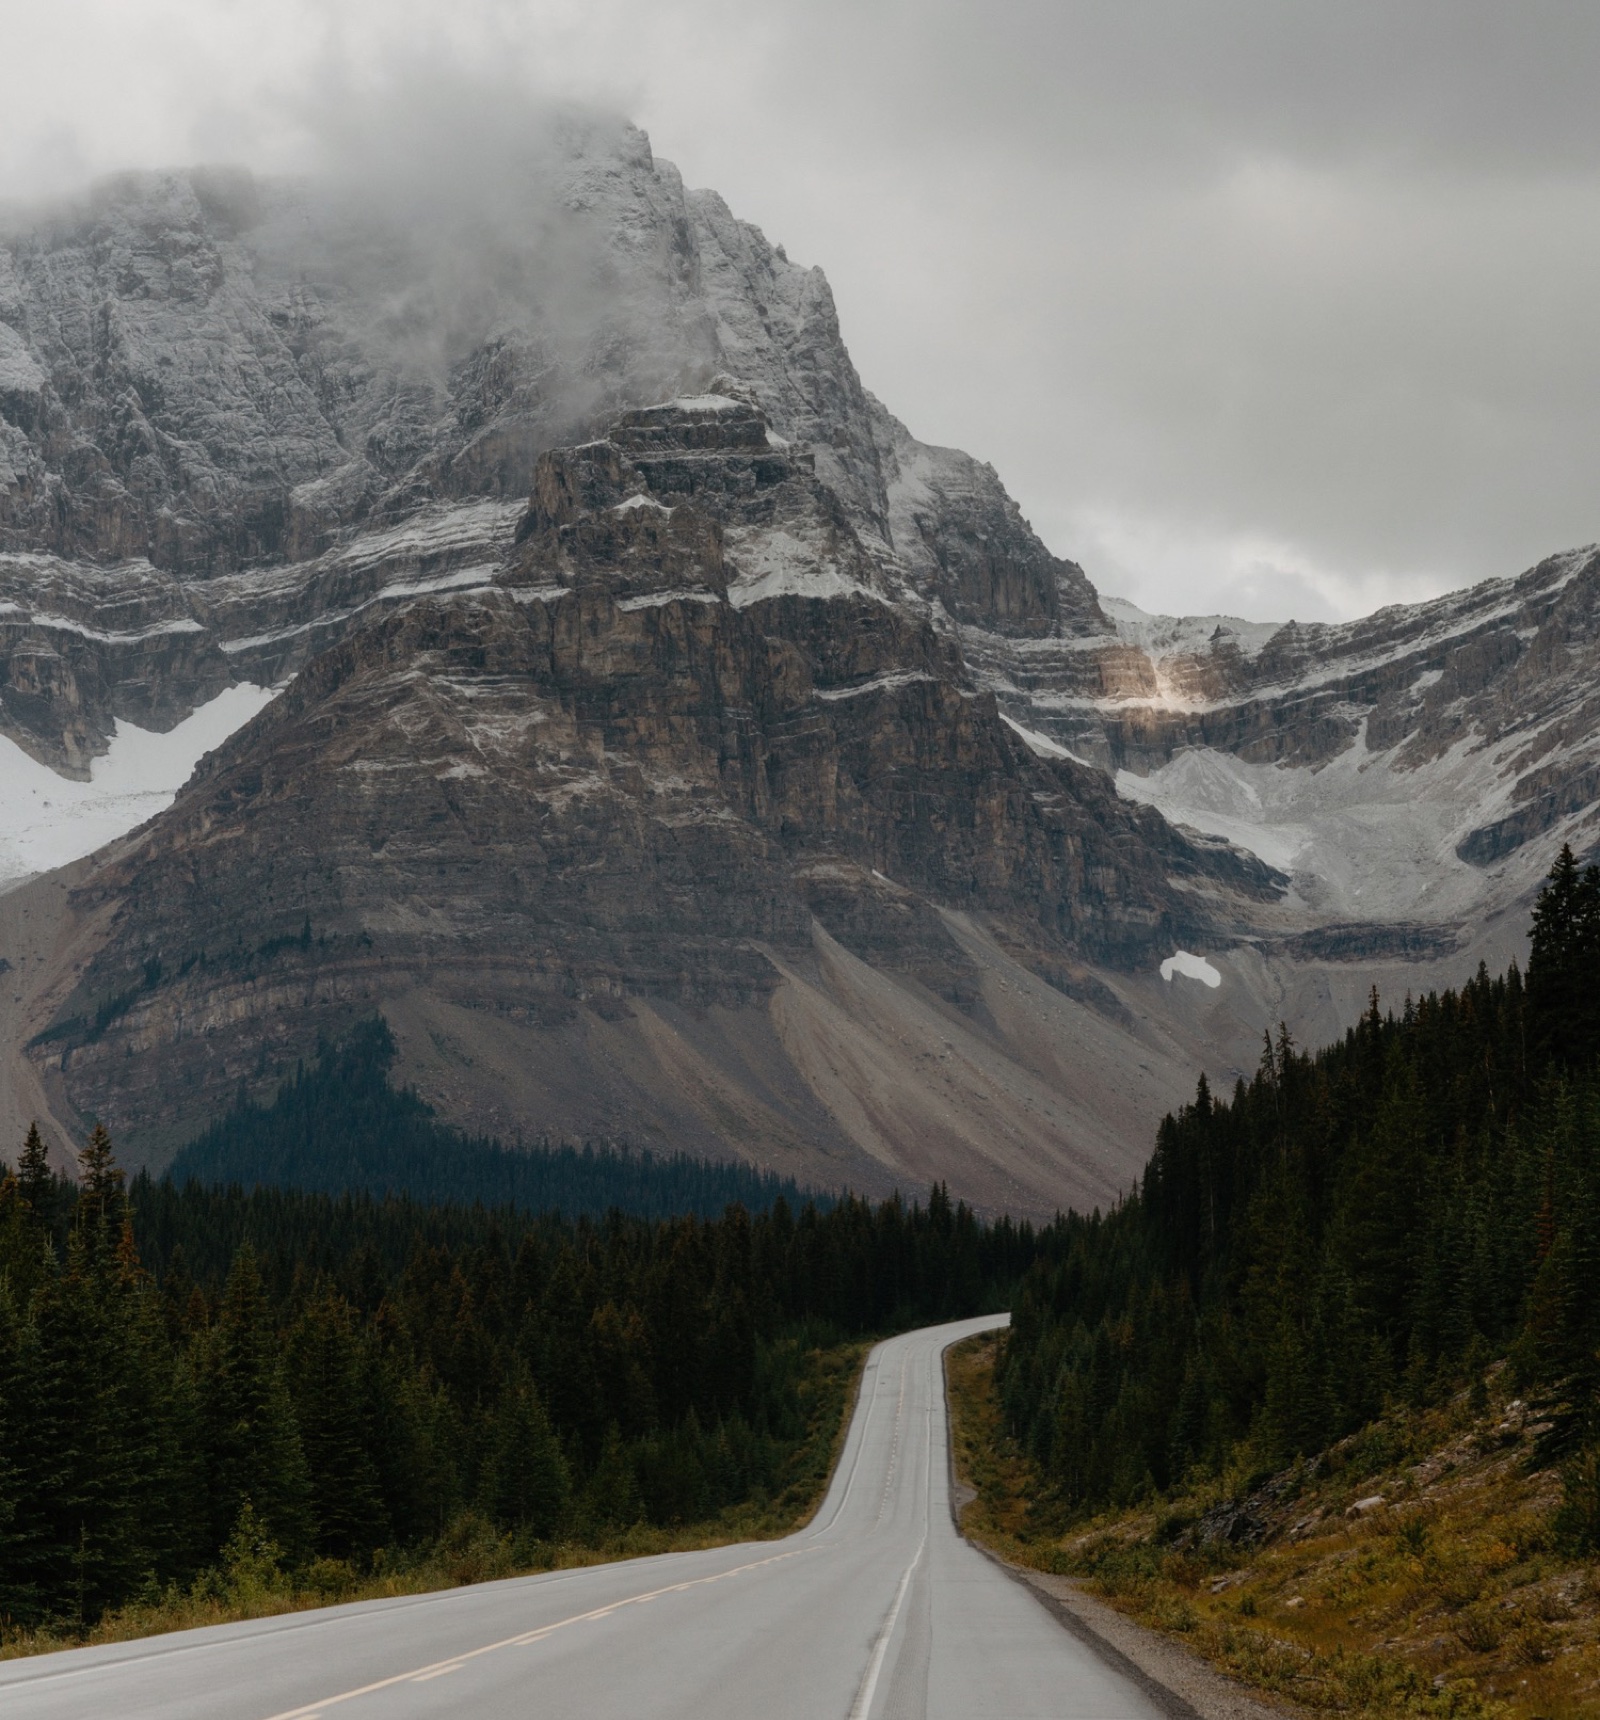 Views of mountains and glaciers in clouds along the Icefields Parkway